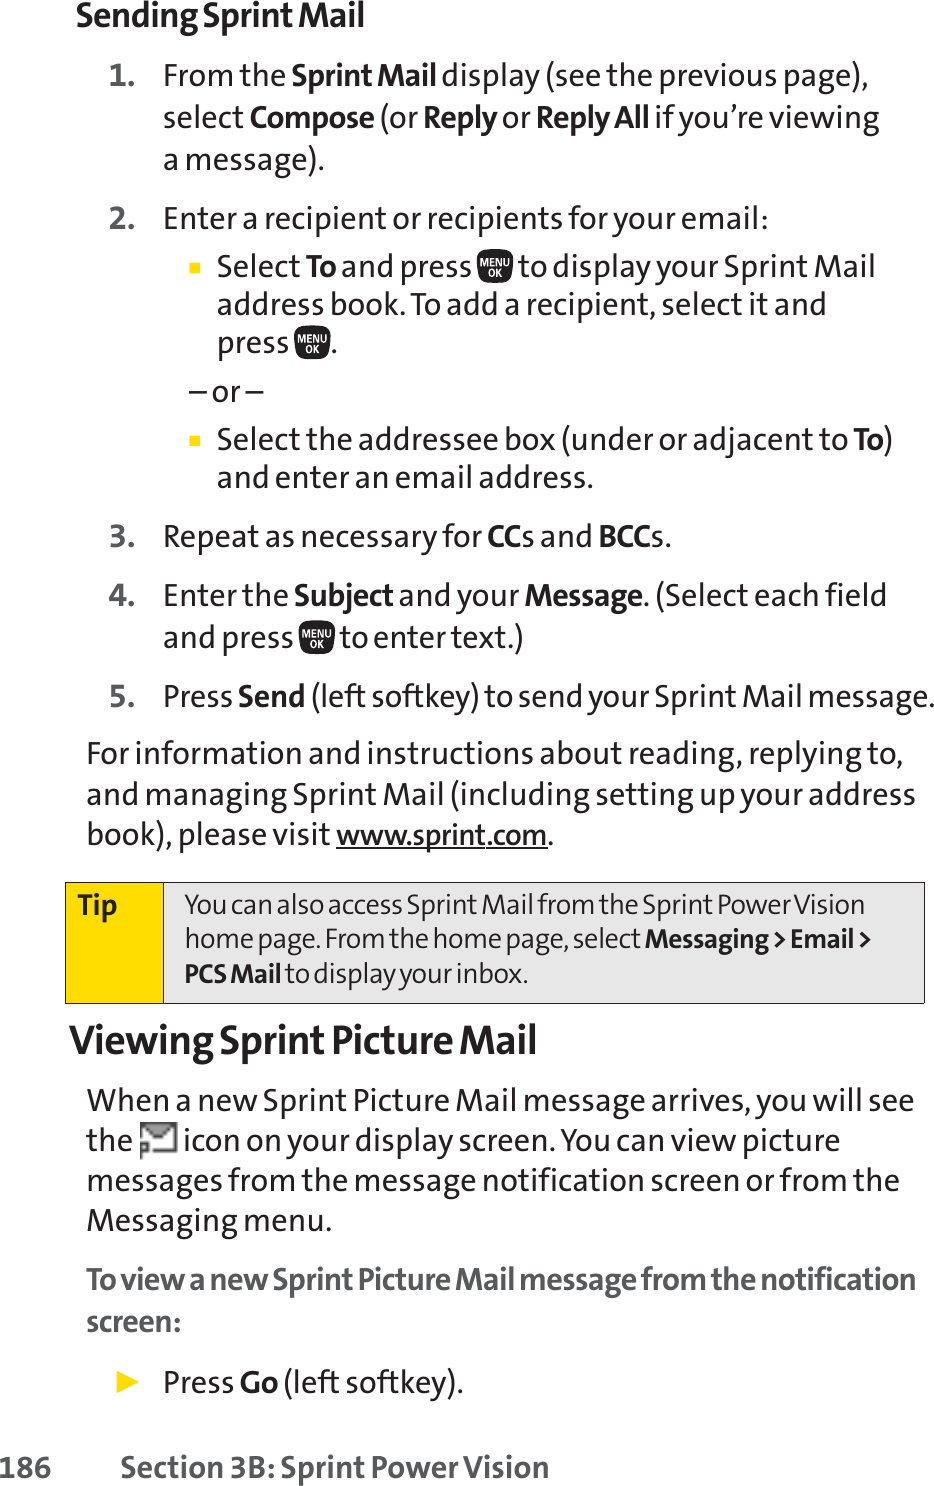 186 Section 3B: Sprint Power VisionSending Sprint Mail1. From the Sprint Mail display (see the previous page),select Compose (or Reply or Reply All if you’re viewing a message).2. Enter a recipient or recipients for your email:䡲Select To and pressto display your Sprint Mailaddress book. To add a recipient, select it and press.– or –䡲Select the addressee box (under or adjacent to To)and enter an email address.3. Repeat as necessary for CCs and BCCs.4. Enter the Subject and your Message. (Select each fieldand press to enter text.)5. Press Send (left softkey) to send your Sprint Mail message.For information and instructions about reading, replying to,and managing Sprint Mail (including setting up your addressbook), please visit www.sprint.com.Viewing Sprint Picture MailWhen a new Sprint Picture Mail message arrives, you will seethe  icon on your display screen. You can view picturemessages from the message notification screen or from theMessaging menu.To view a new Sprint Picture Mail message from the notificationscreen:䊳Press Go (left softkey).Tip You can also access Sprint Mail from the Sprint Power Visionhome page. From the home page, select Messaging &gt; Email &gt;PCS Mail to display your inbox.